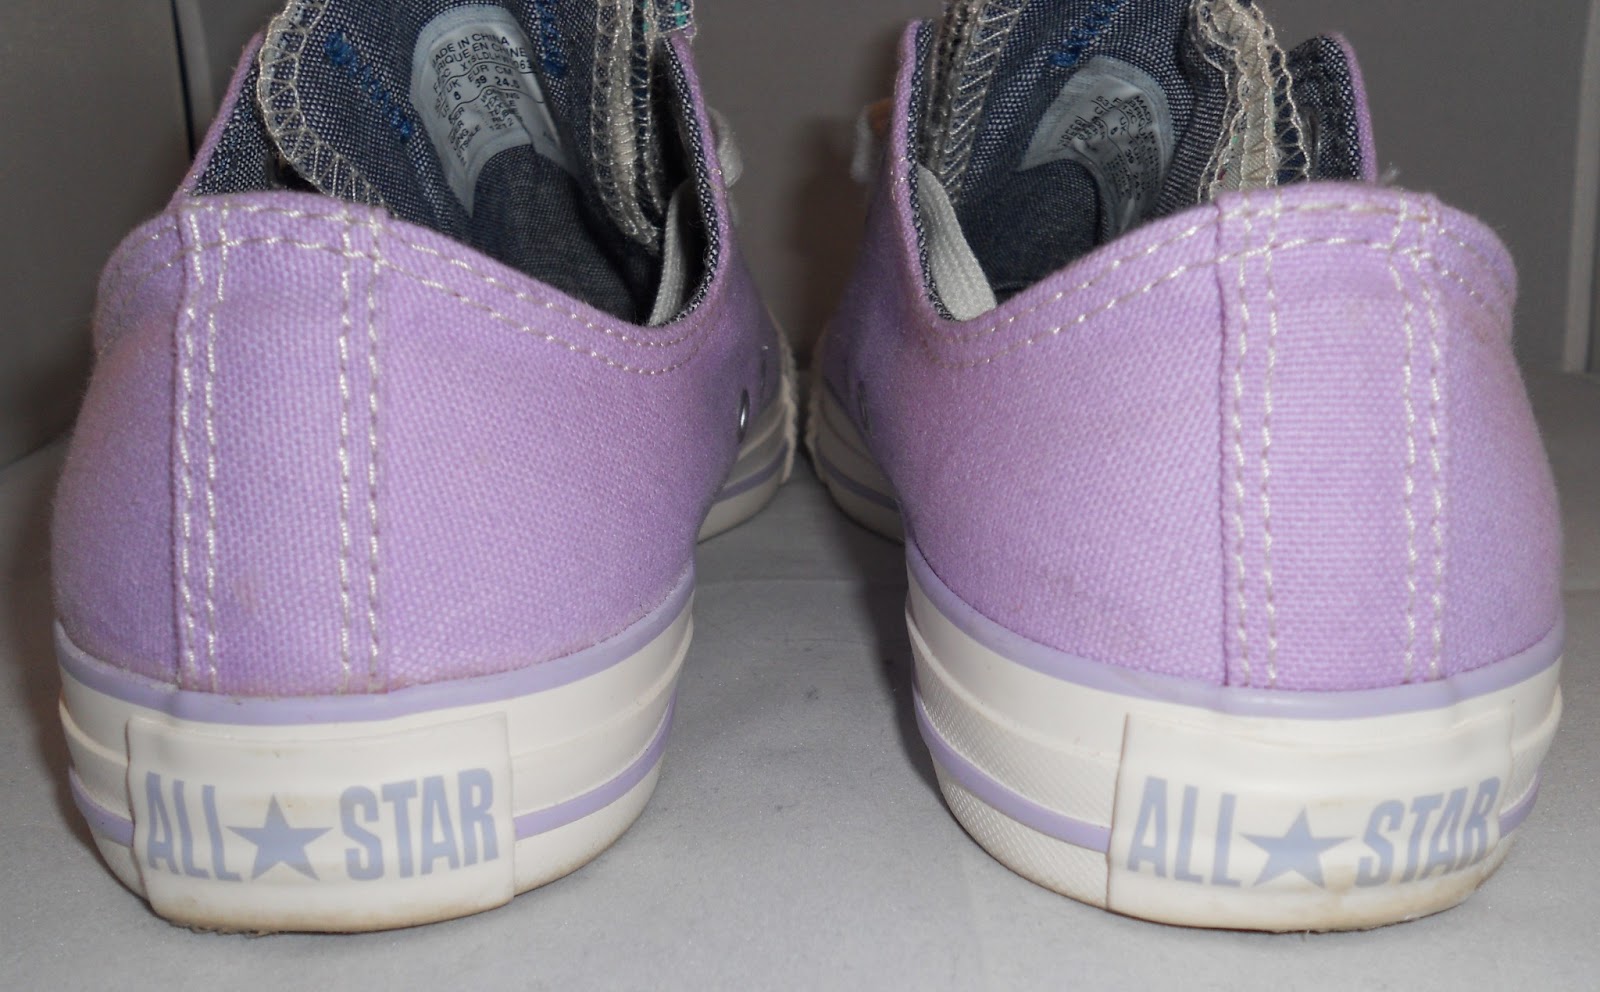 wand_included: Pastel Converse